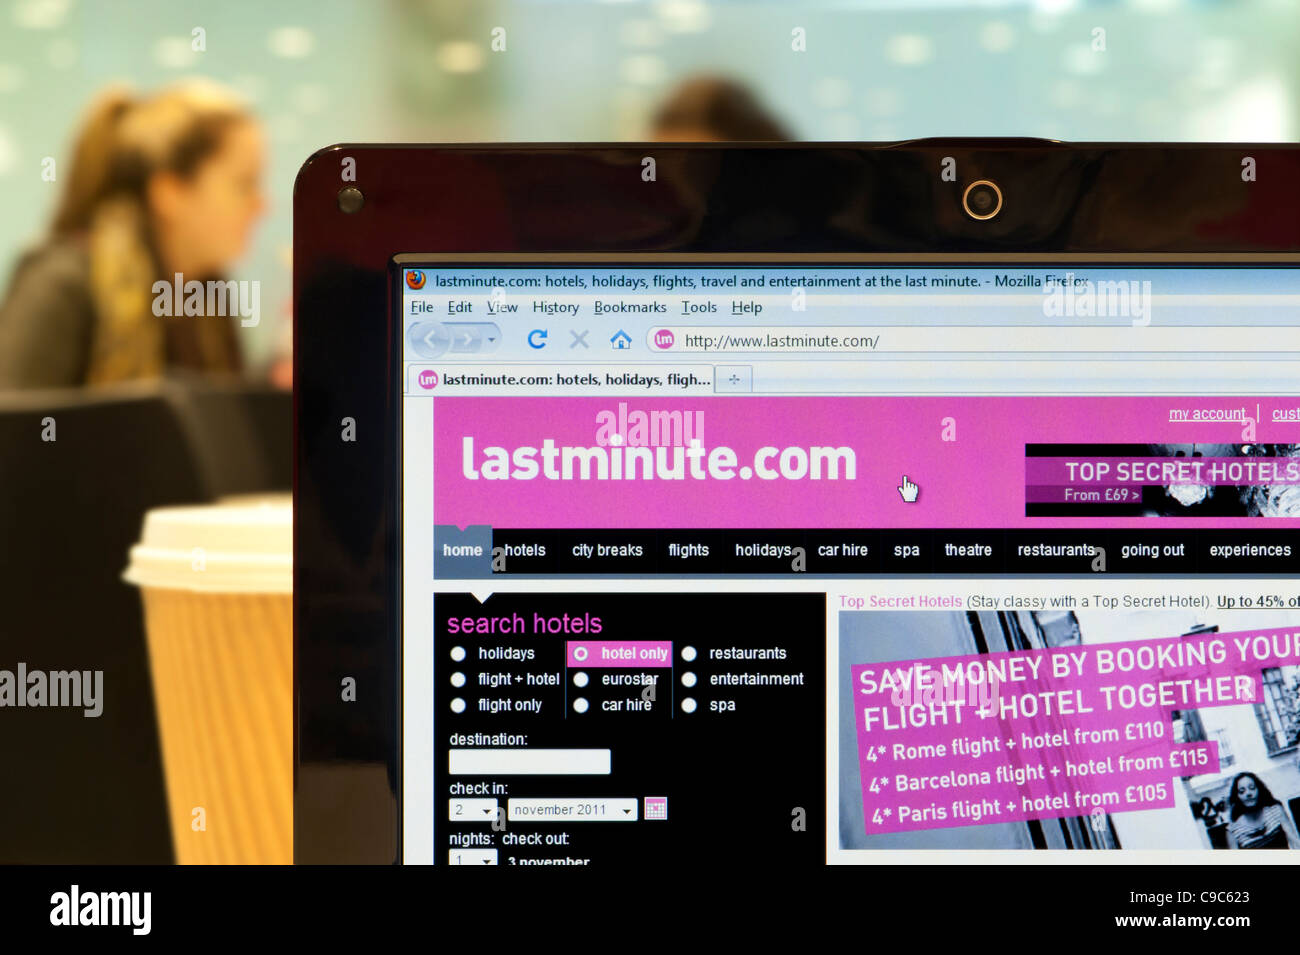 The Lastminute.com website shot in a coffee shop environment (Editorial use only: print, TV, e-book and editorial website). Stock Photo